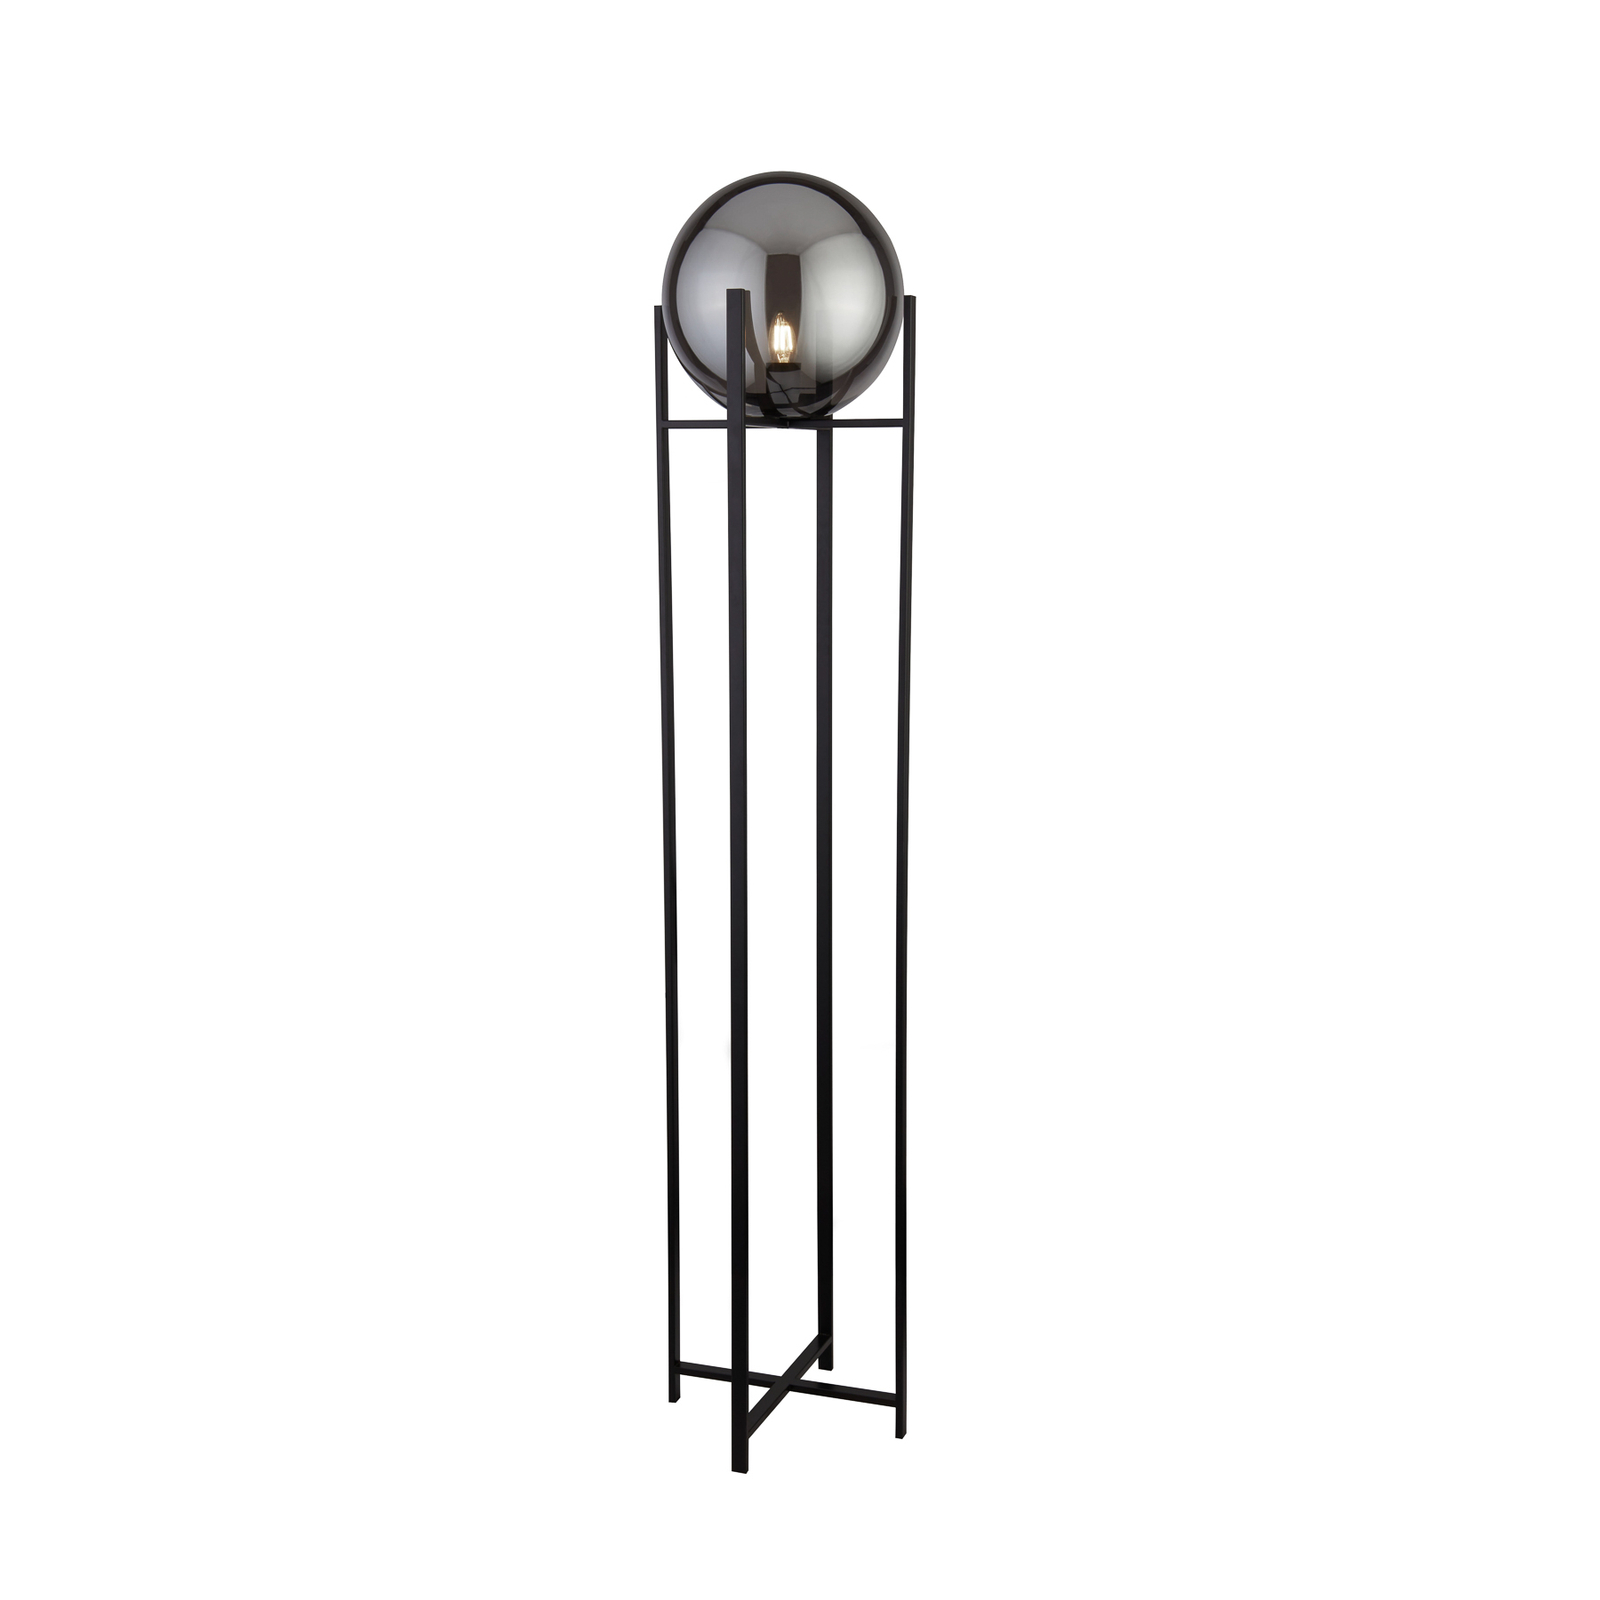 Amsterdam floor lamp with a glass lampshade